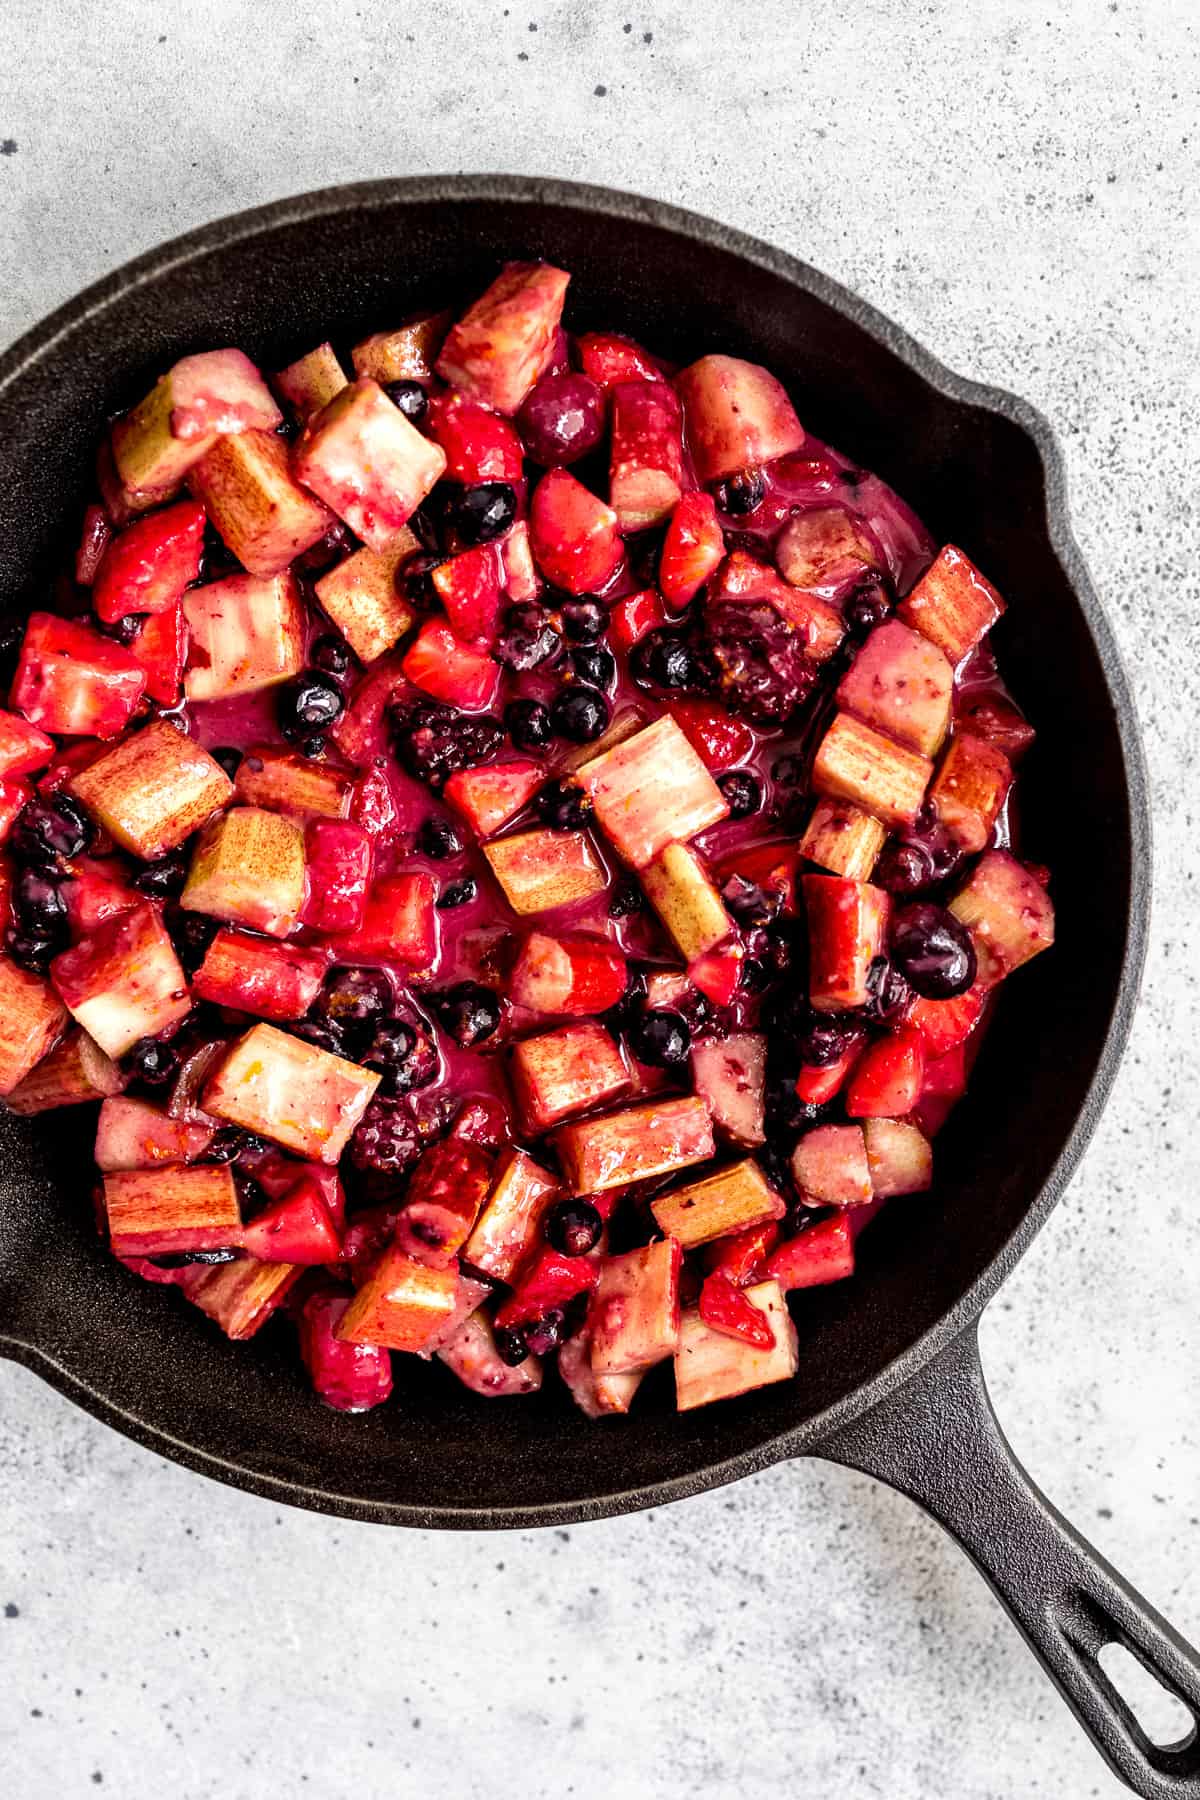 macerated fruit in a skillet before baking